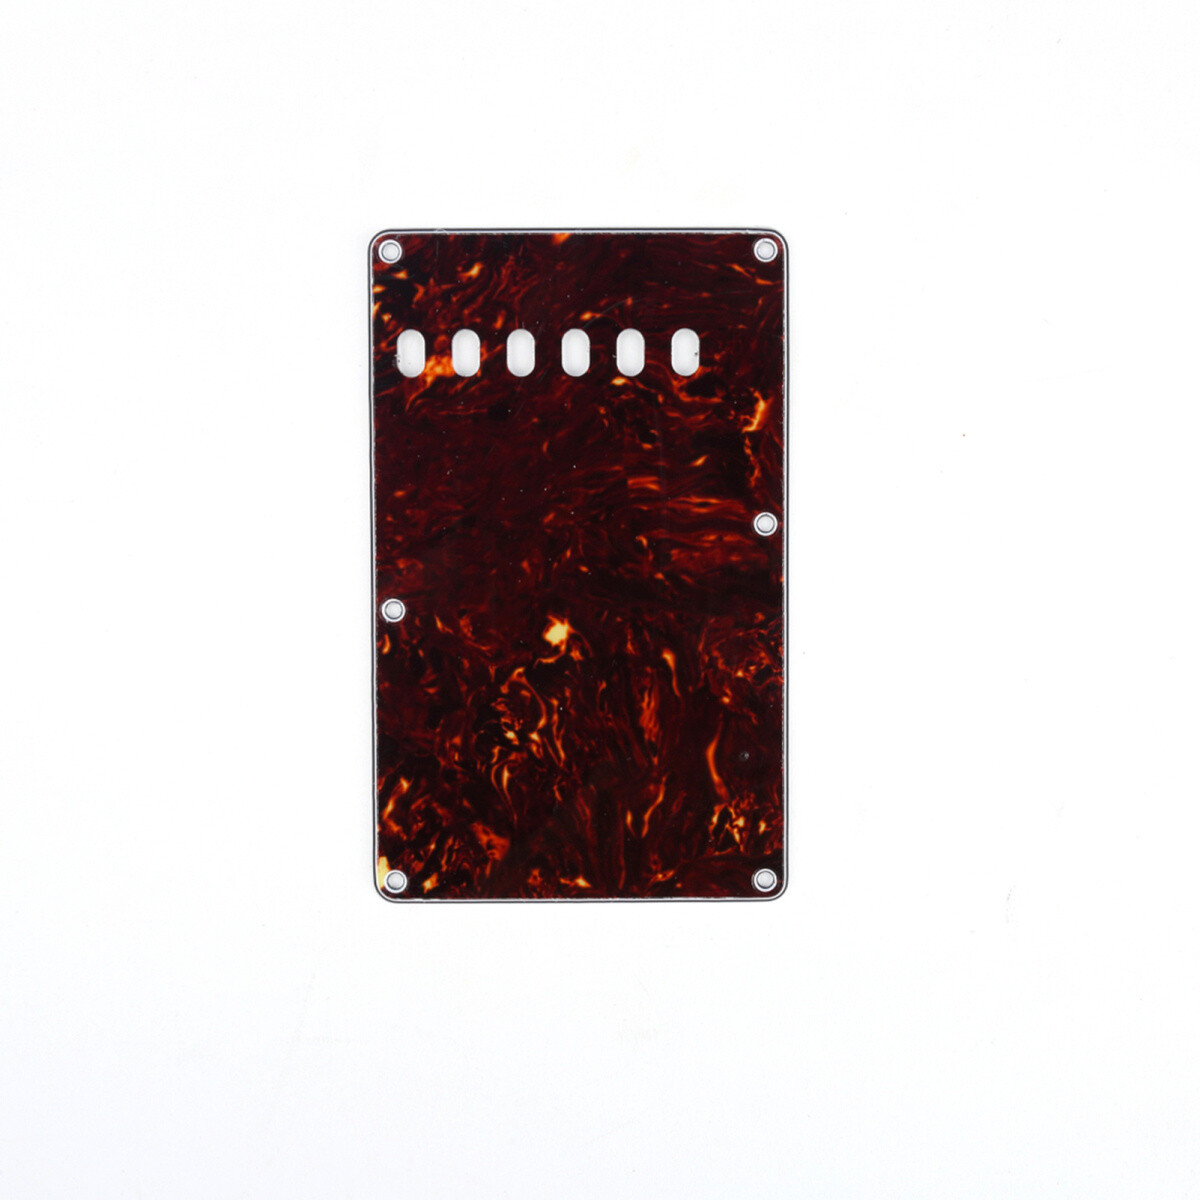 Brio Brown Tortoise Vintage Style Back Plate Tremolo Cover 4 ply - US/Mexican Fender®Strat® Fit